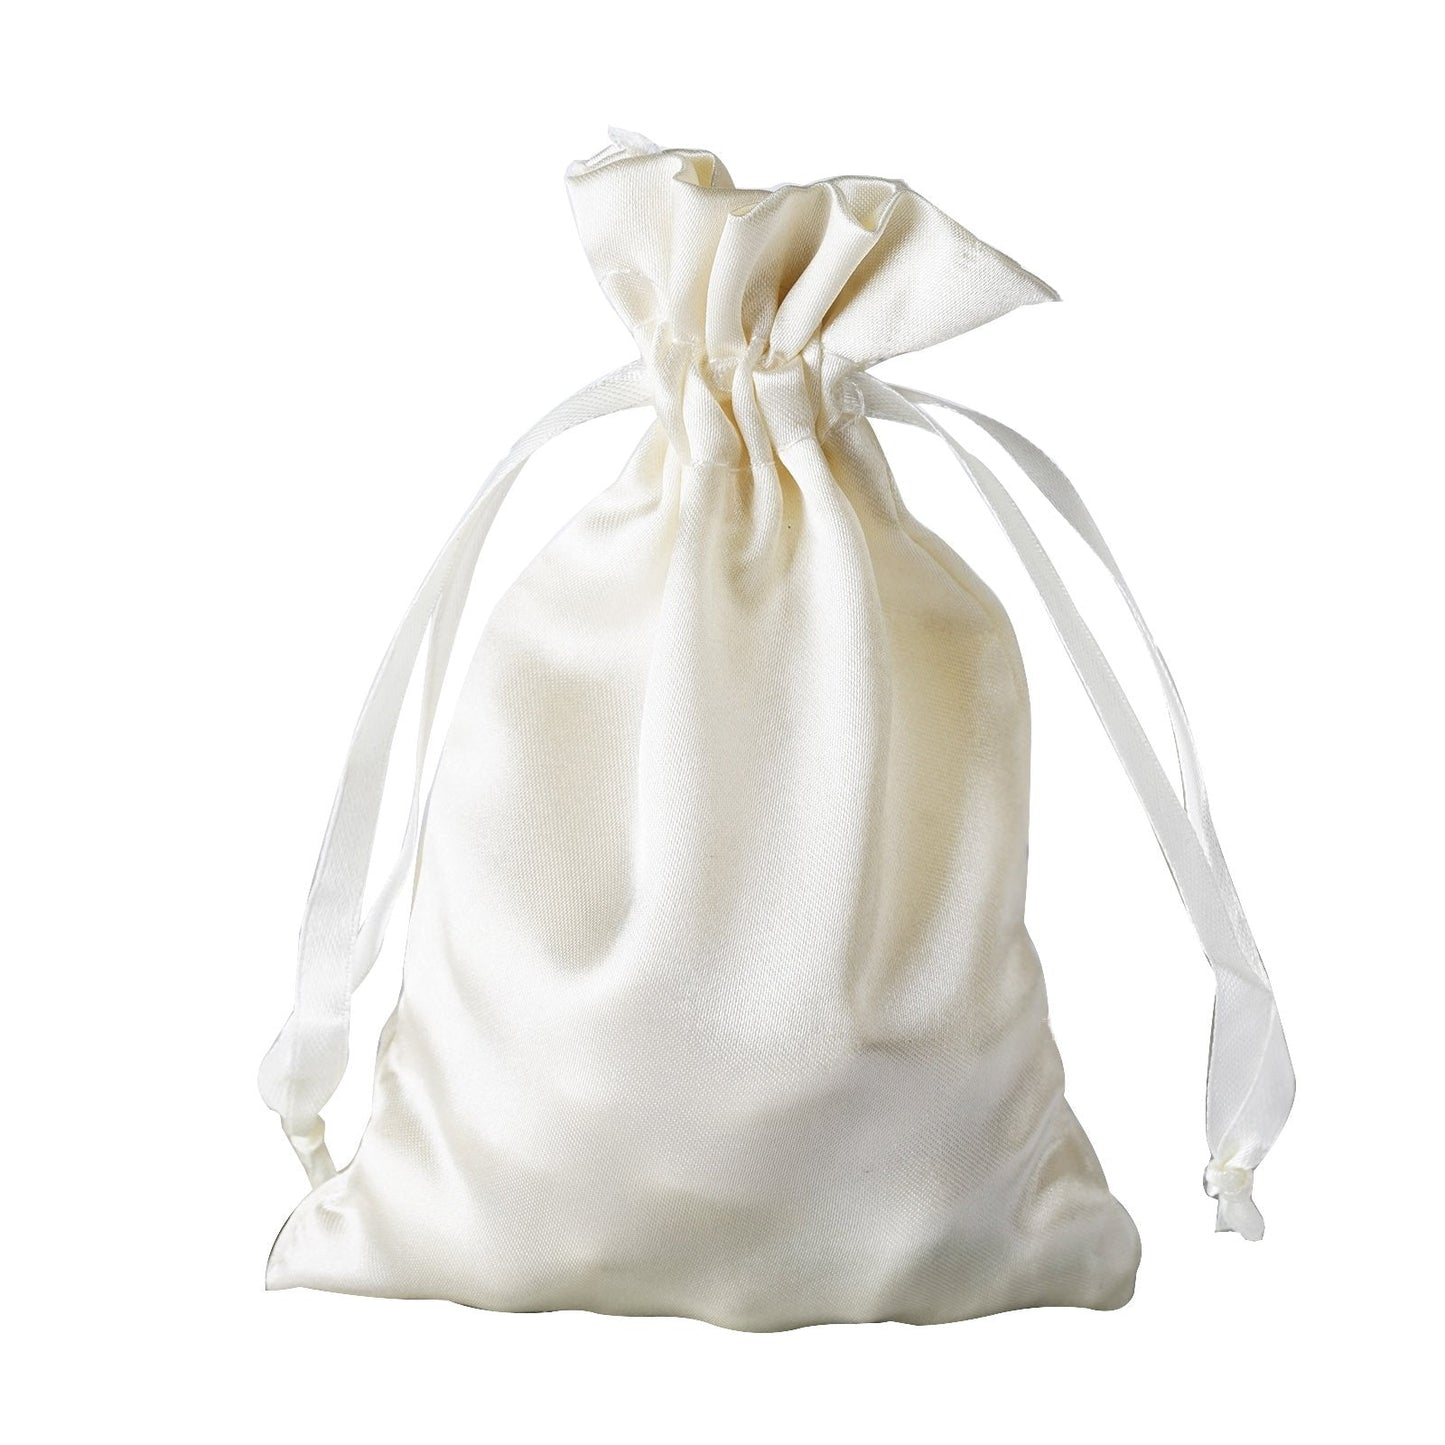 12 Pack 4"x6" Ivory Satin Drawstring Wedding Party Favor Gift Bags